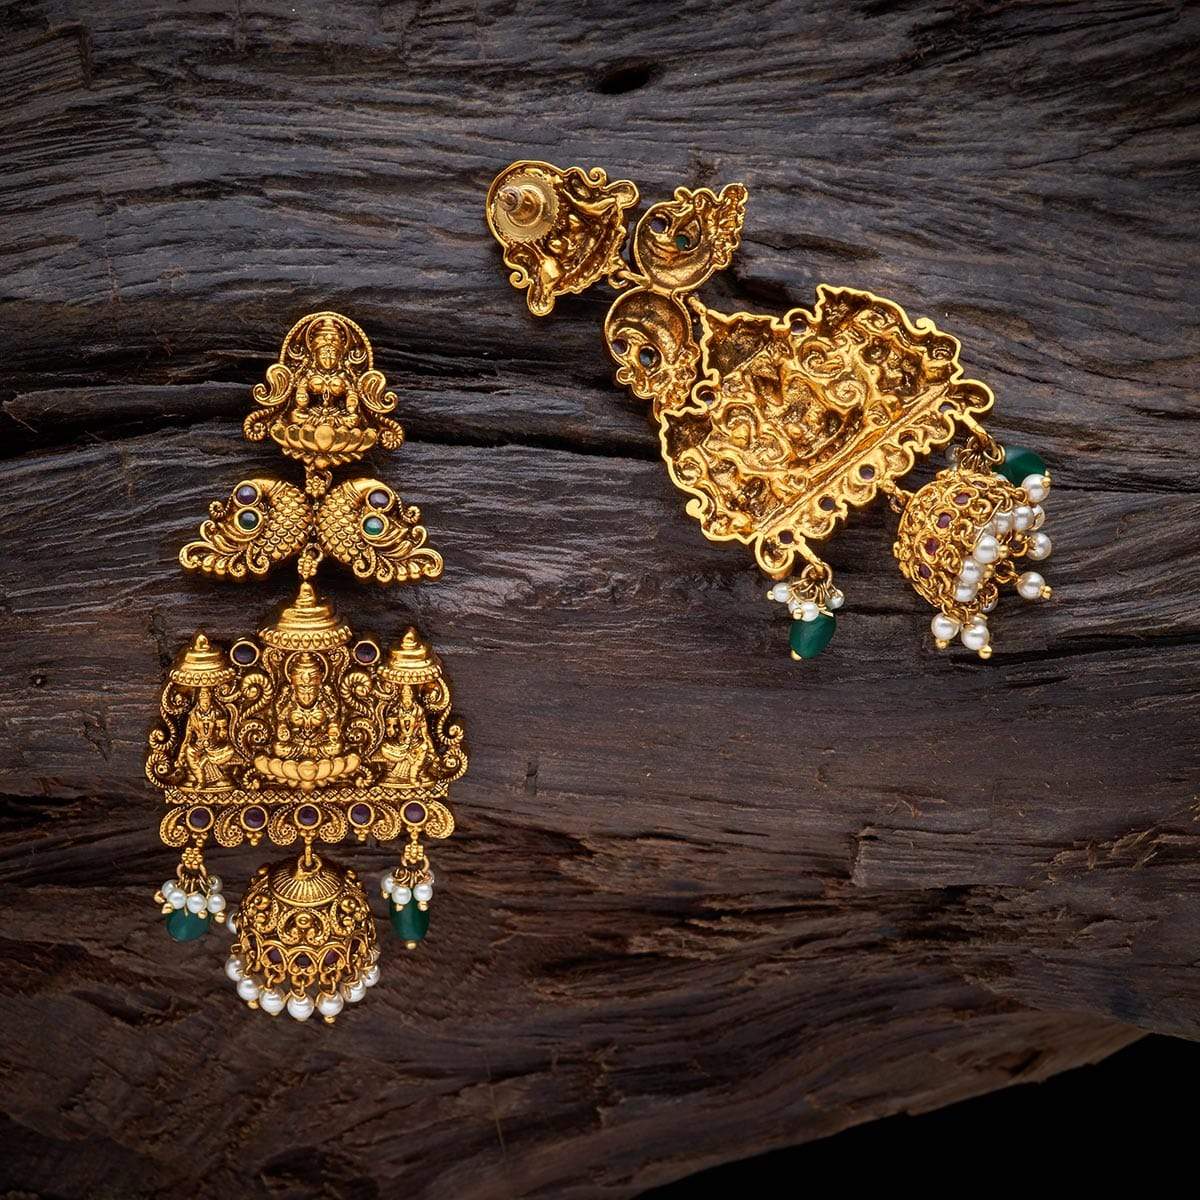 Shop Antique Earrings Online For Women-Kushal's Fashion Jewellery